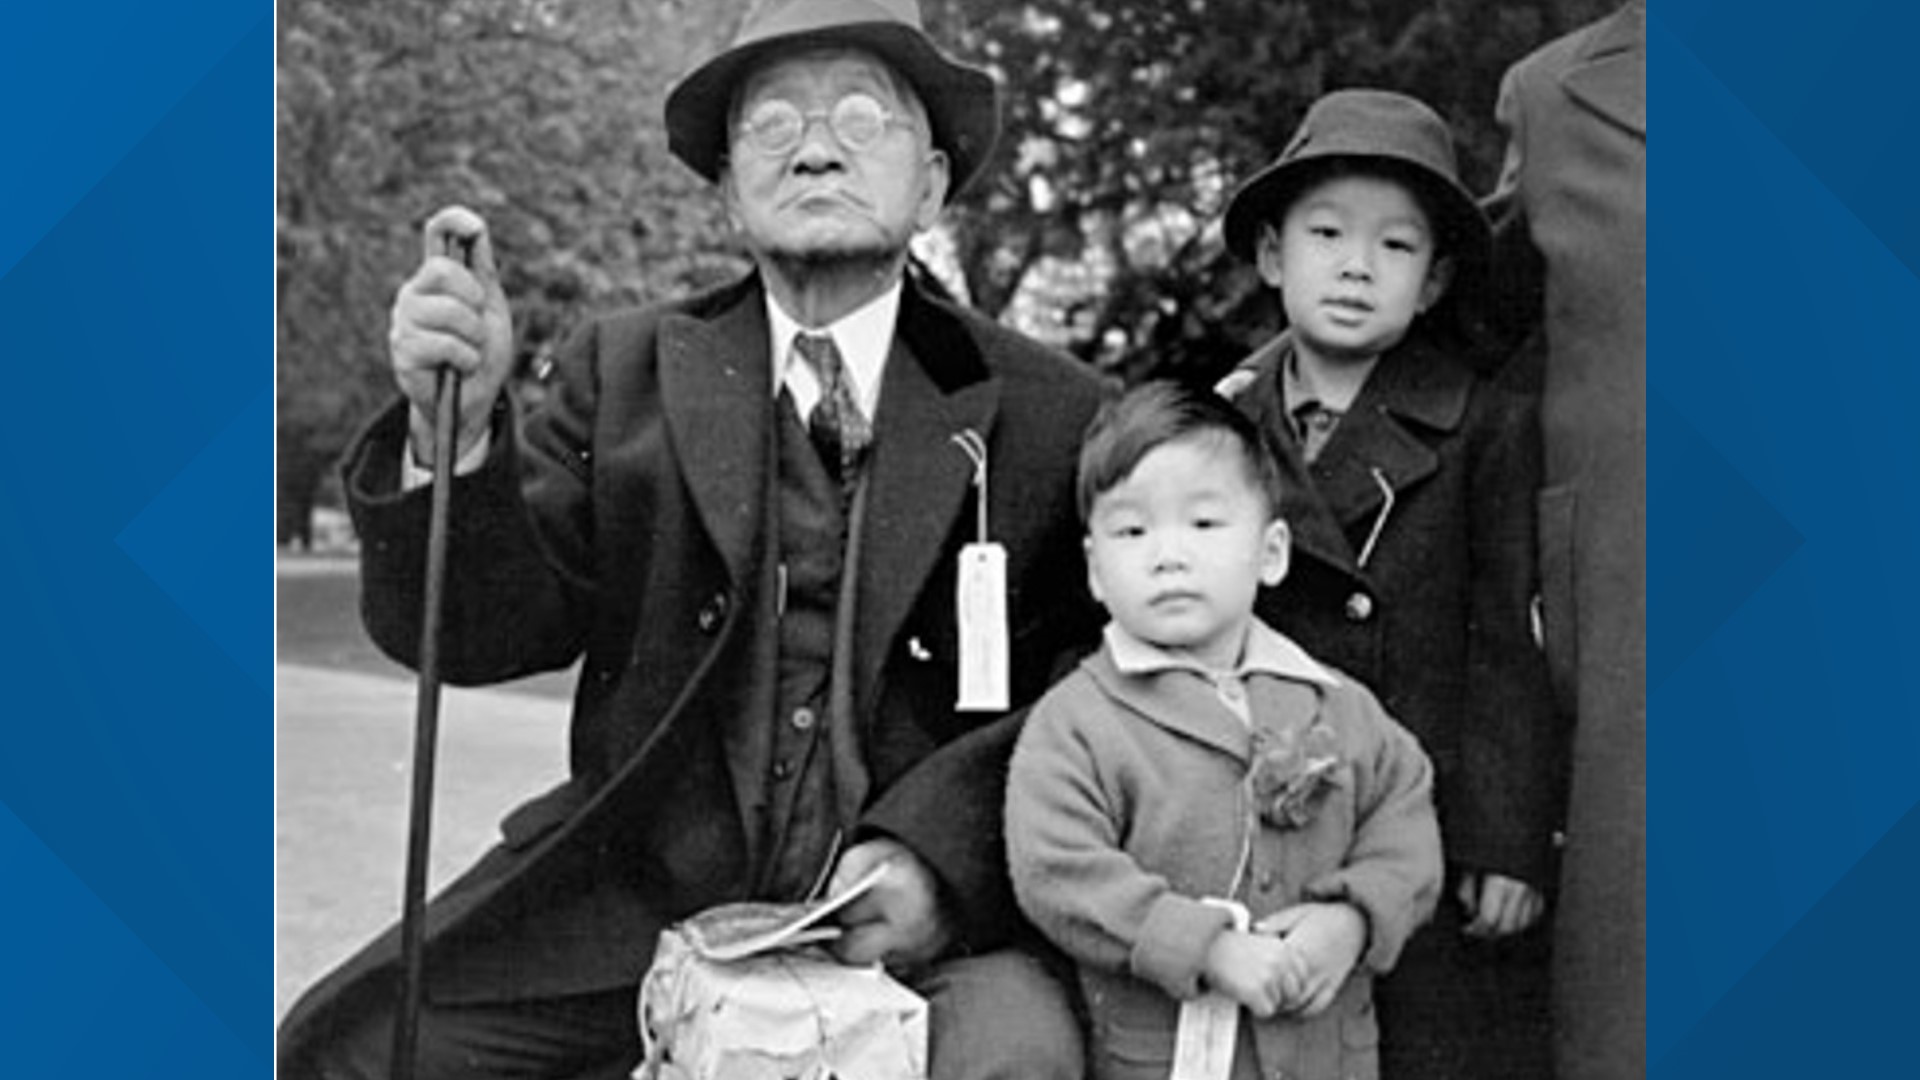 Karen Jiobu and her family were among the 120,000 people of Japanese ancestry forced out of their homes and moved to internment camps.